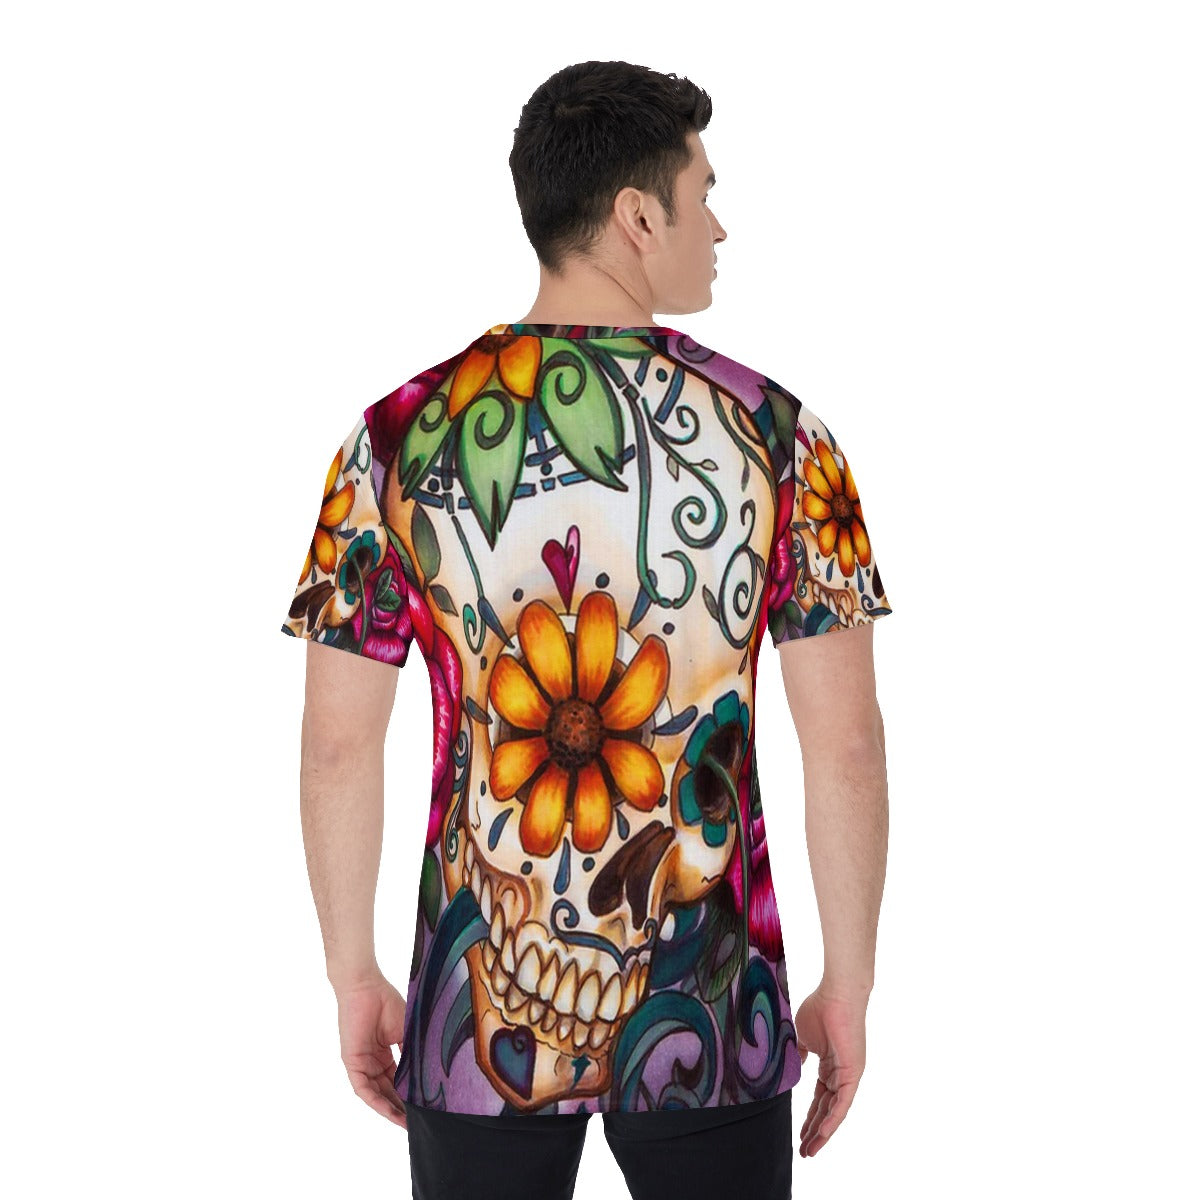 Day of the dead Men's O-Neck T-Shirt, Sugar skull floral tshirt, Gothic Halloween costume